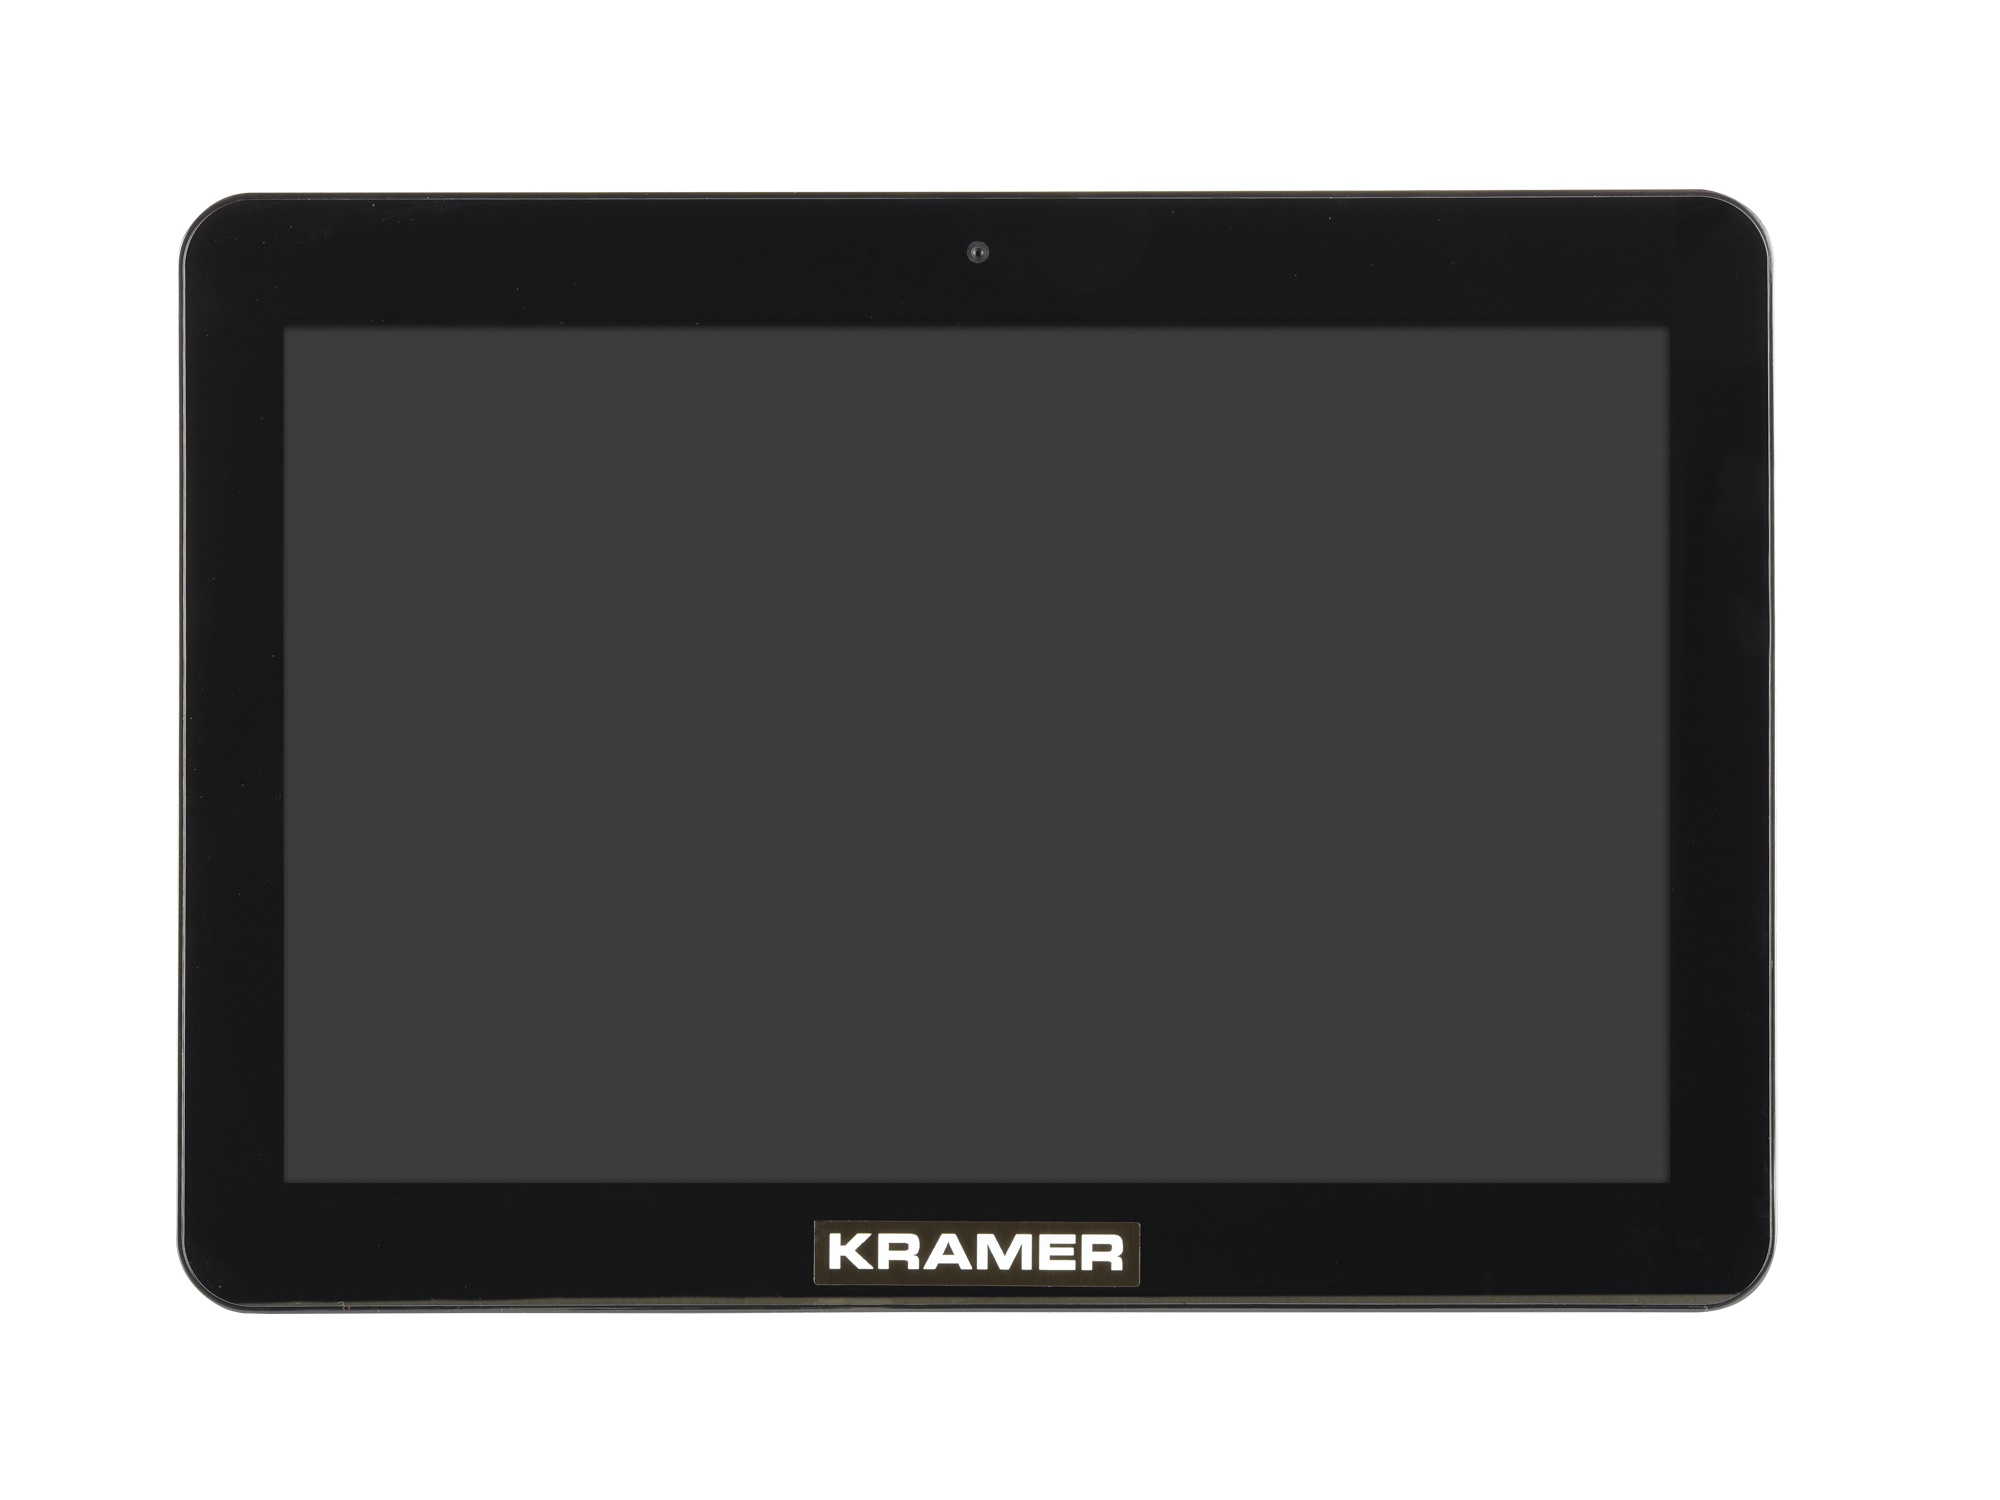 KT-1010 10-Inch Wall and Table Mount PoE Touch Panel by Kramer